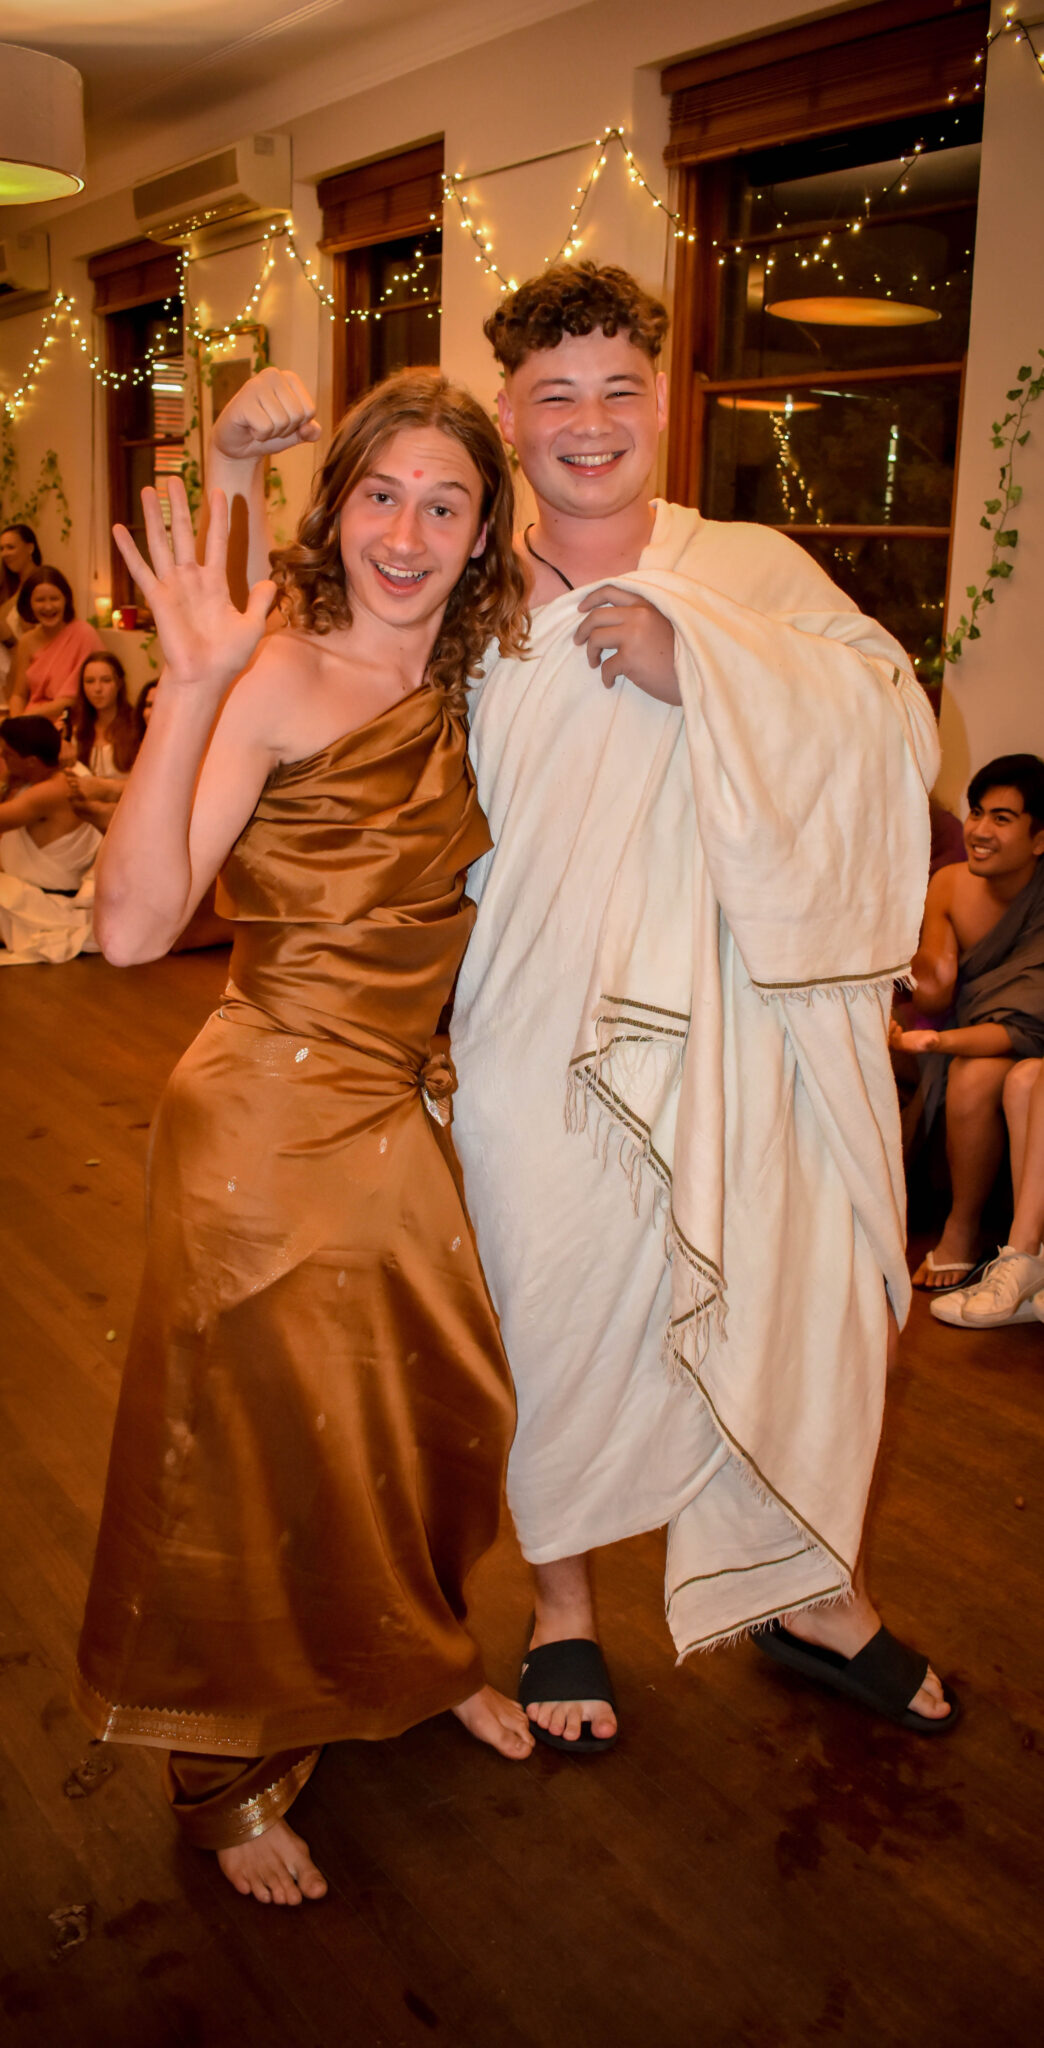 Classics-Week-Toga-Party-2021-Edited-20-scaled-1. Campion College Australia.